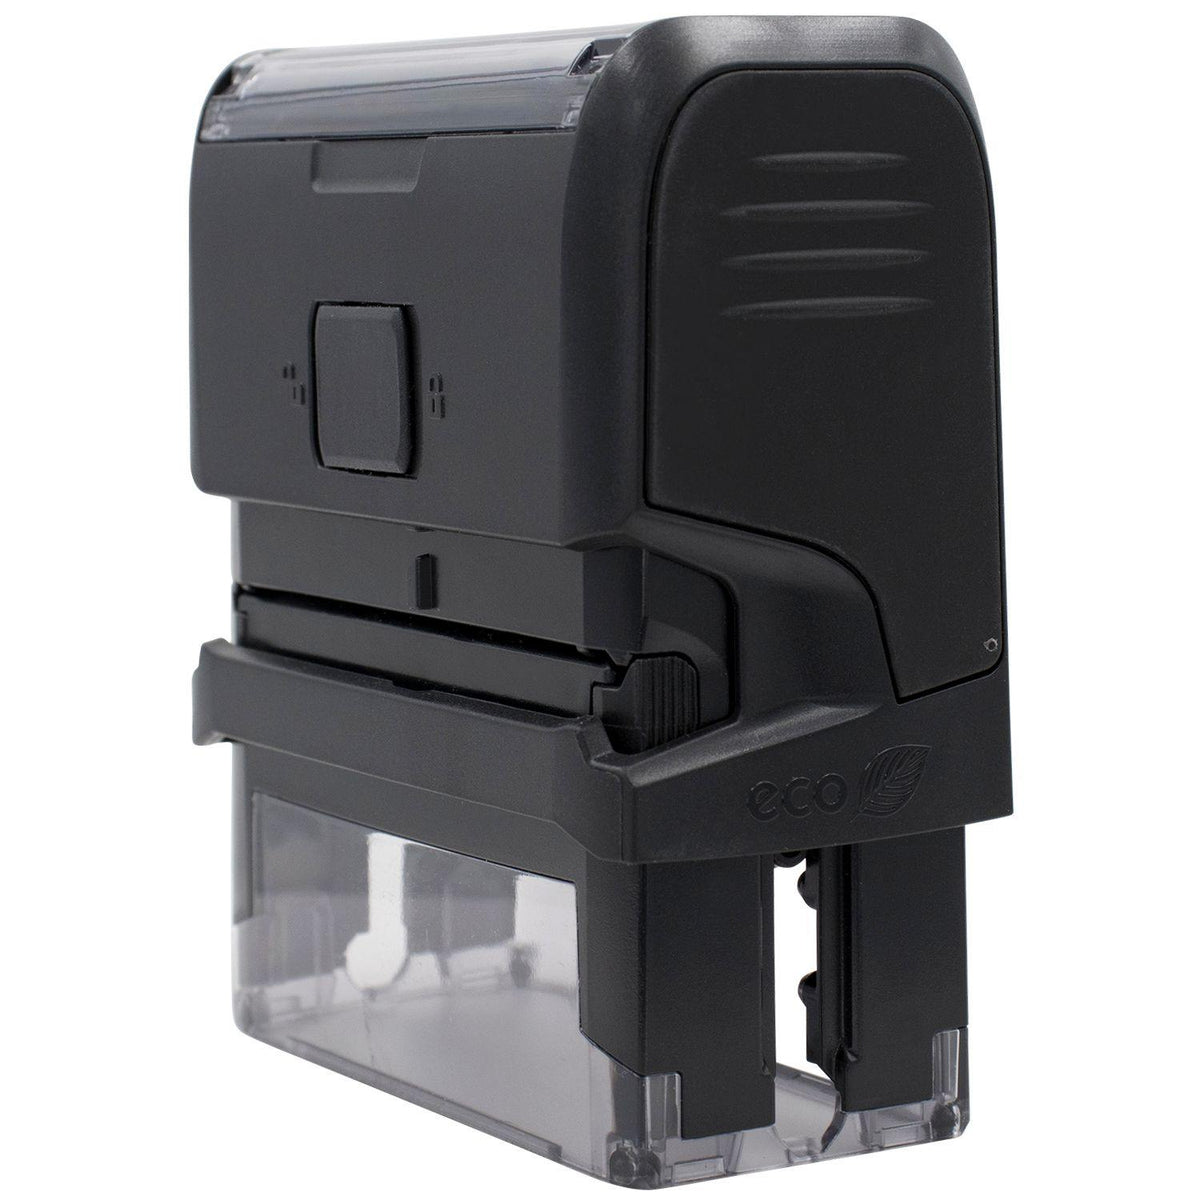 Self-Inking Cargado Stamp - Engineer Seal Stamps - Brand_Trodat, Impression Size_Small, Stamp Type_Self-Inking Stamp, Type of Use_Office, Type of Use_Postal &amp; Mailing